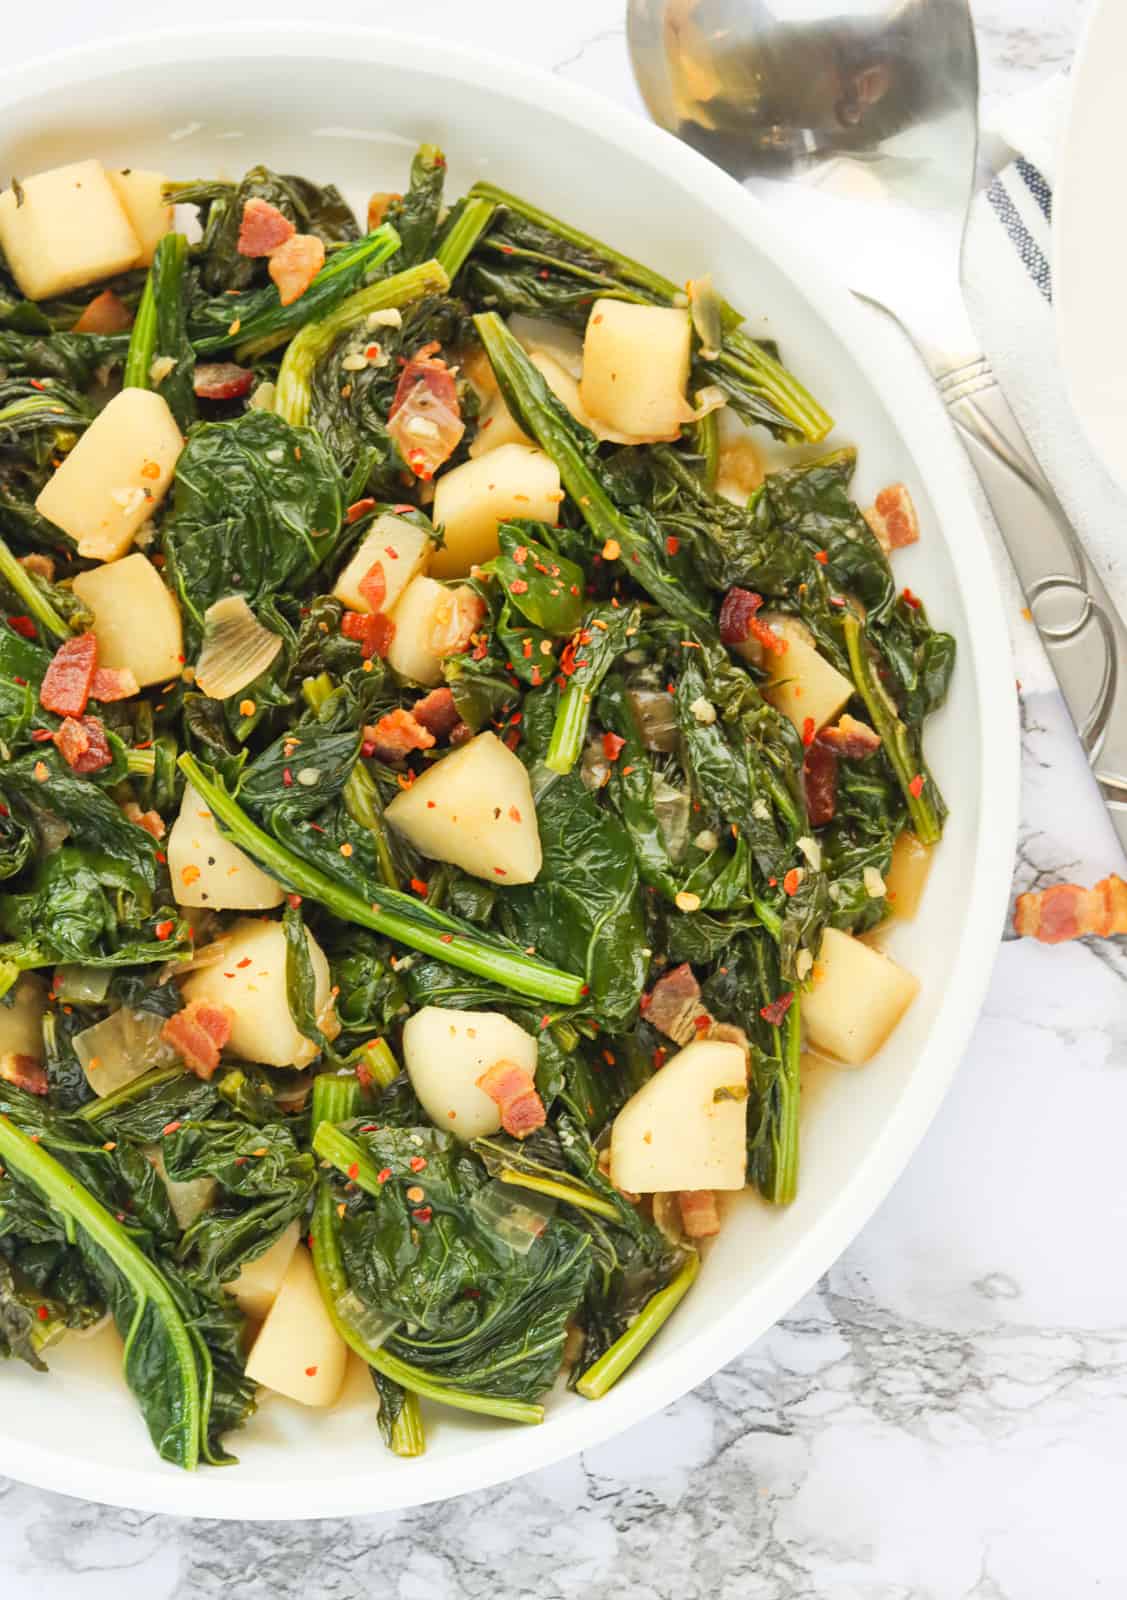 Smoky, fragrant and spicy turnip leaves